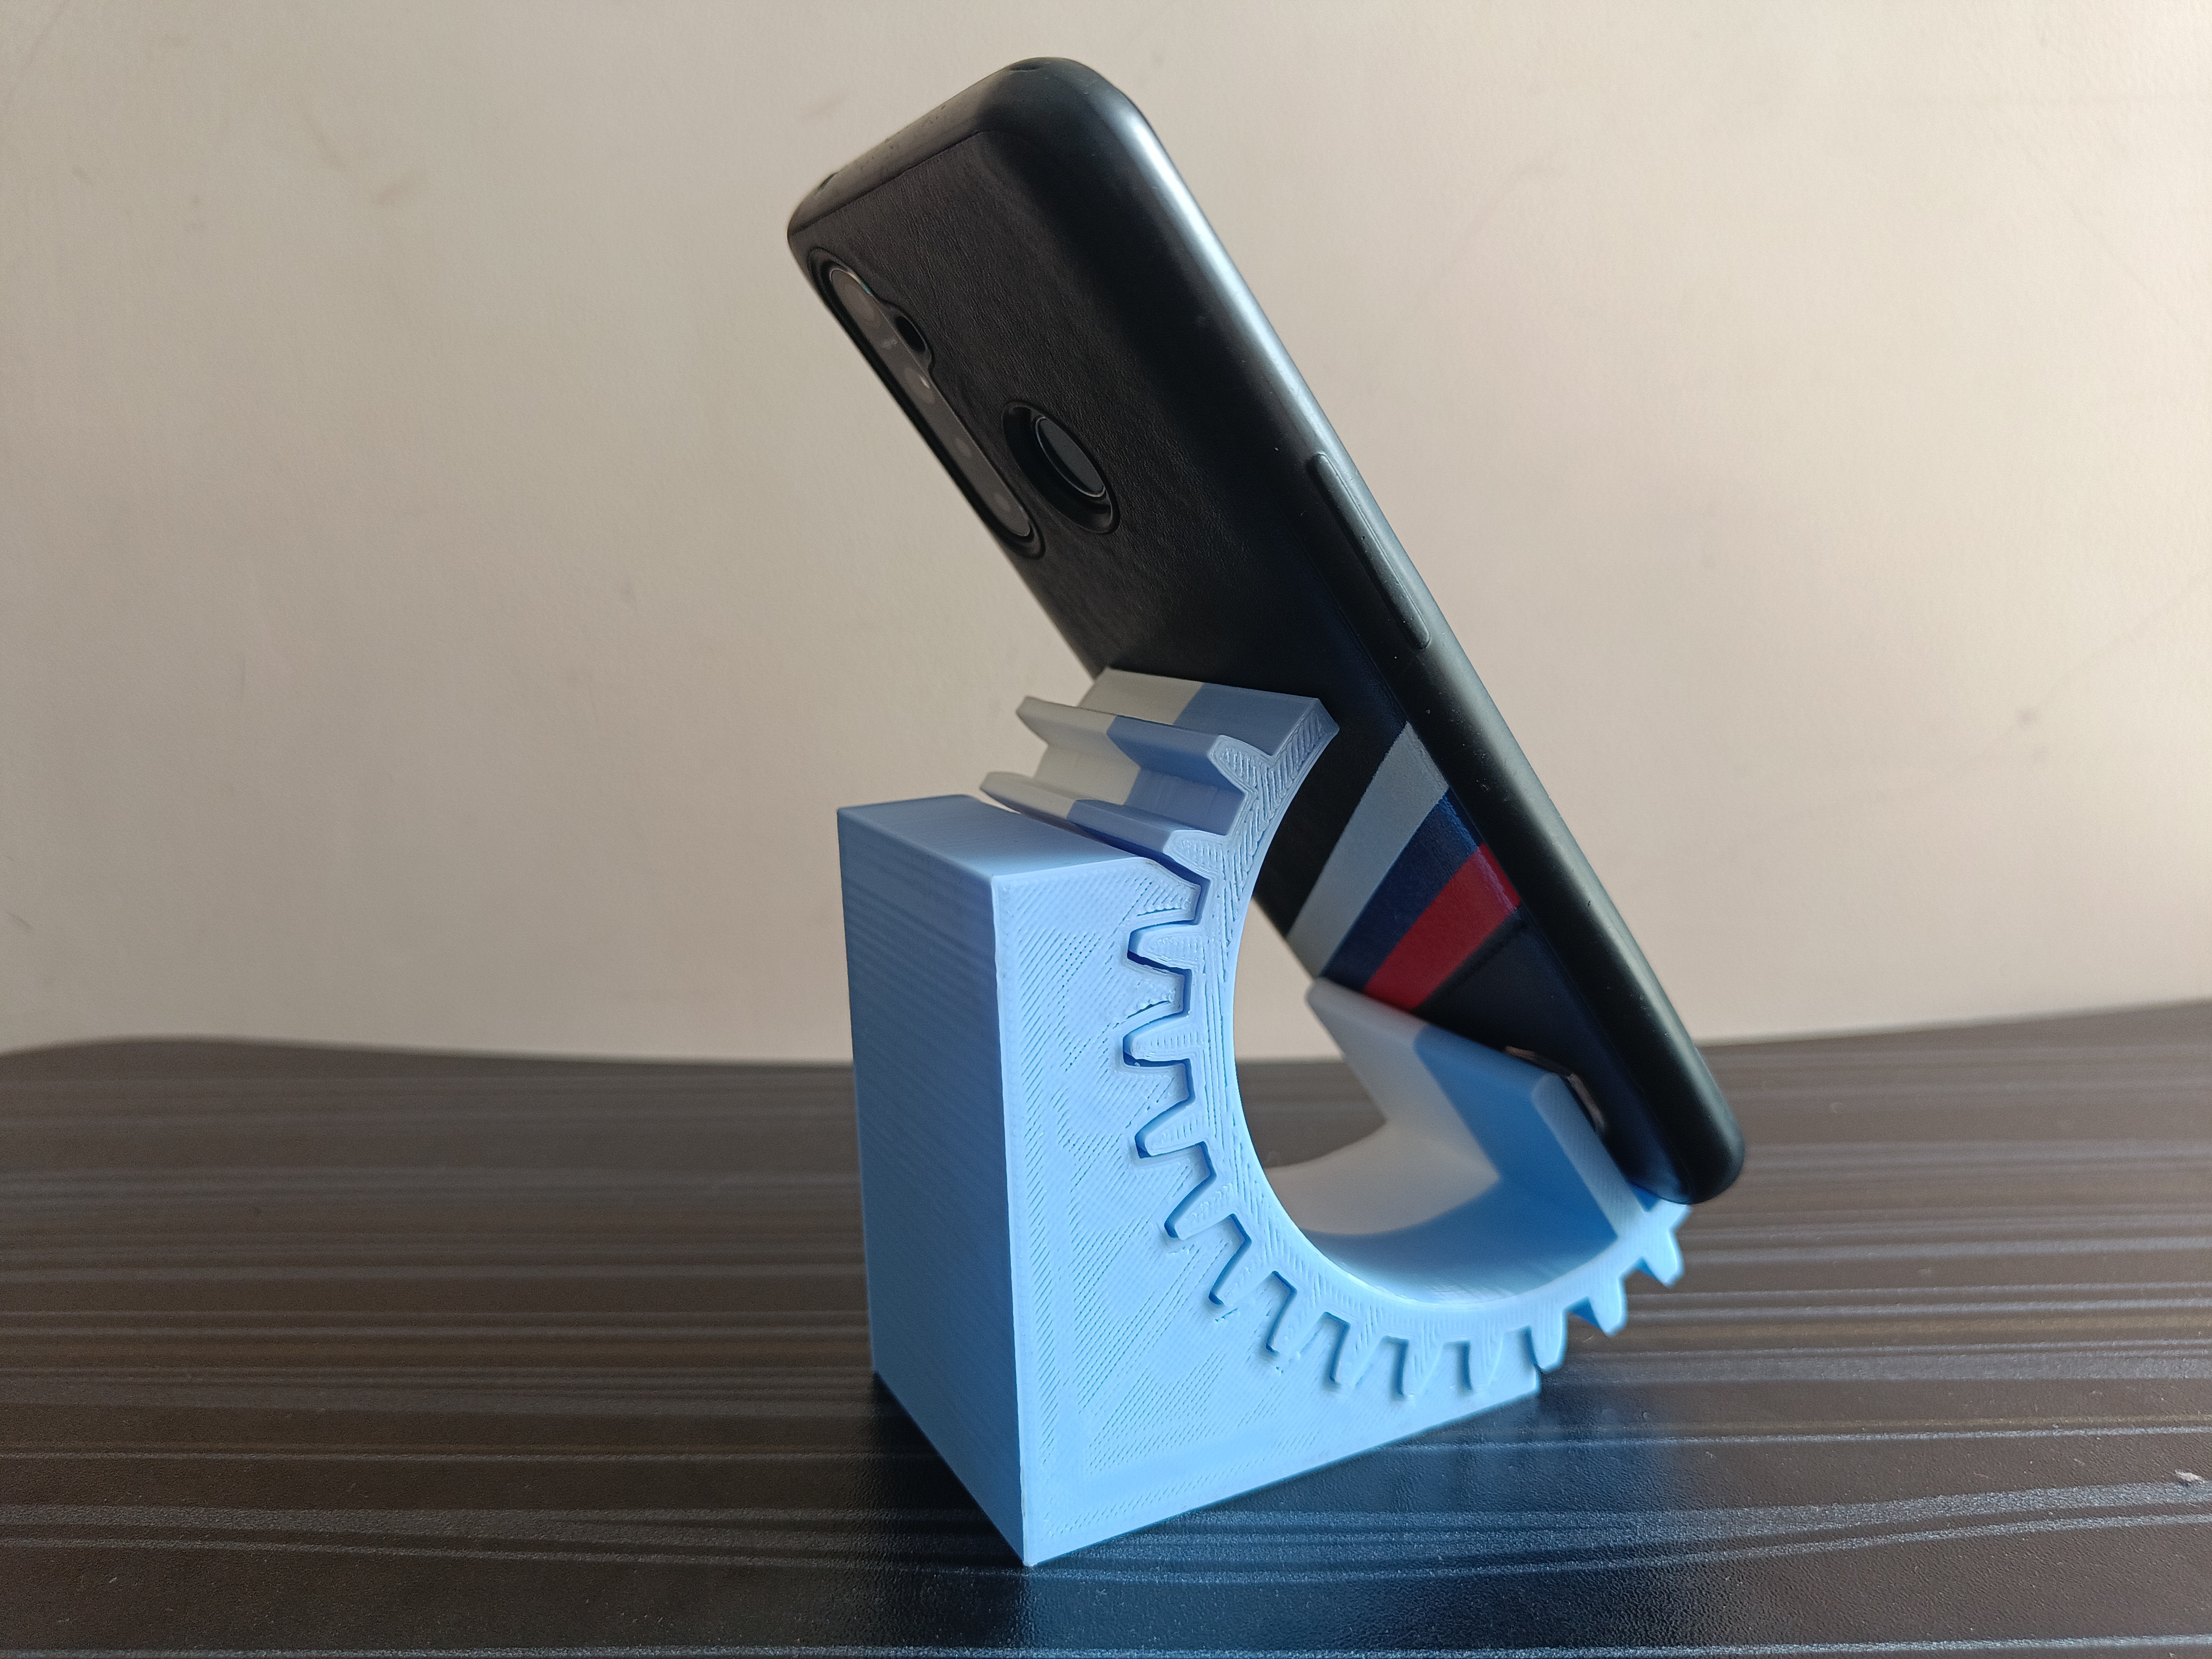 3D mobile stand tested - 3D model by 3DDesigner on